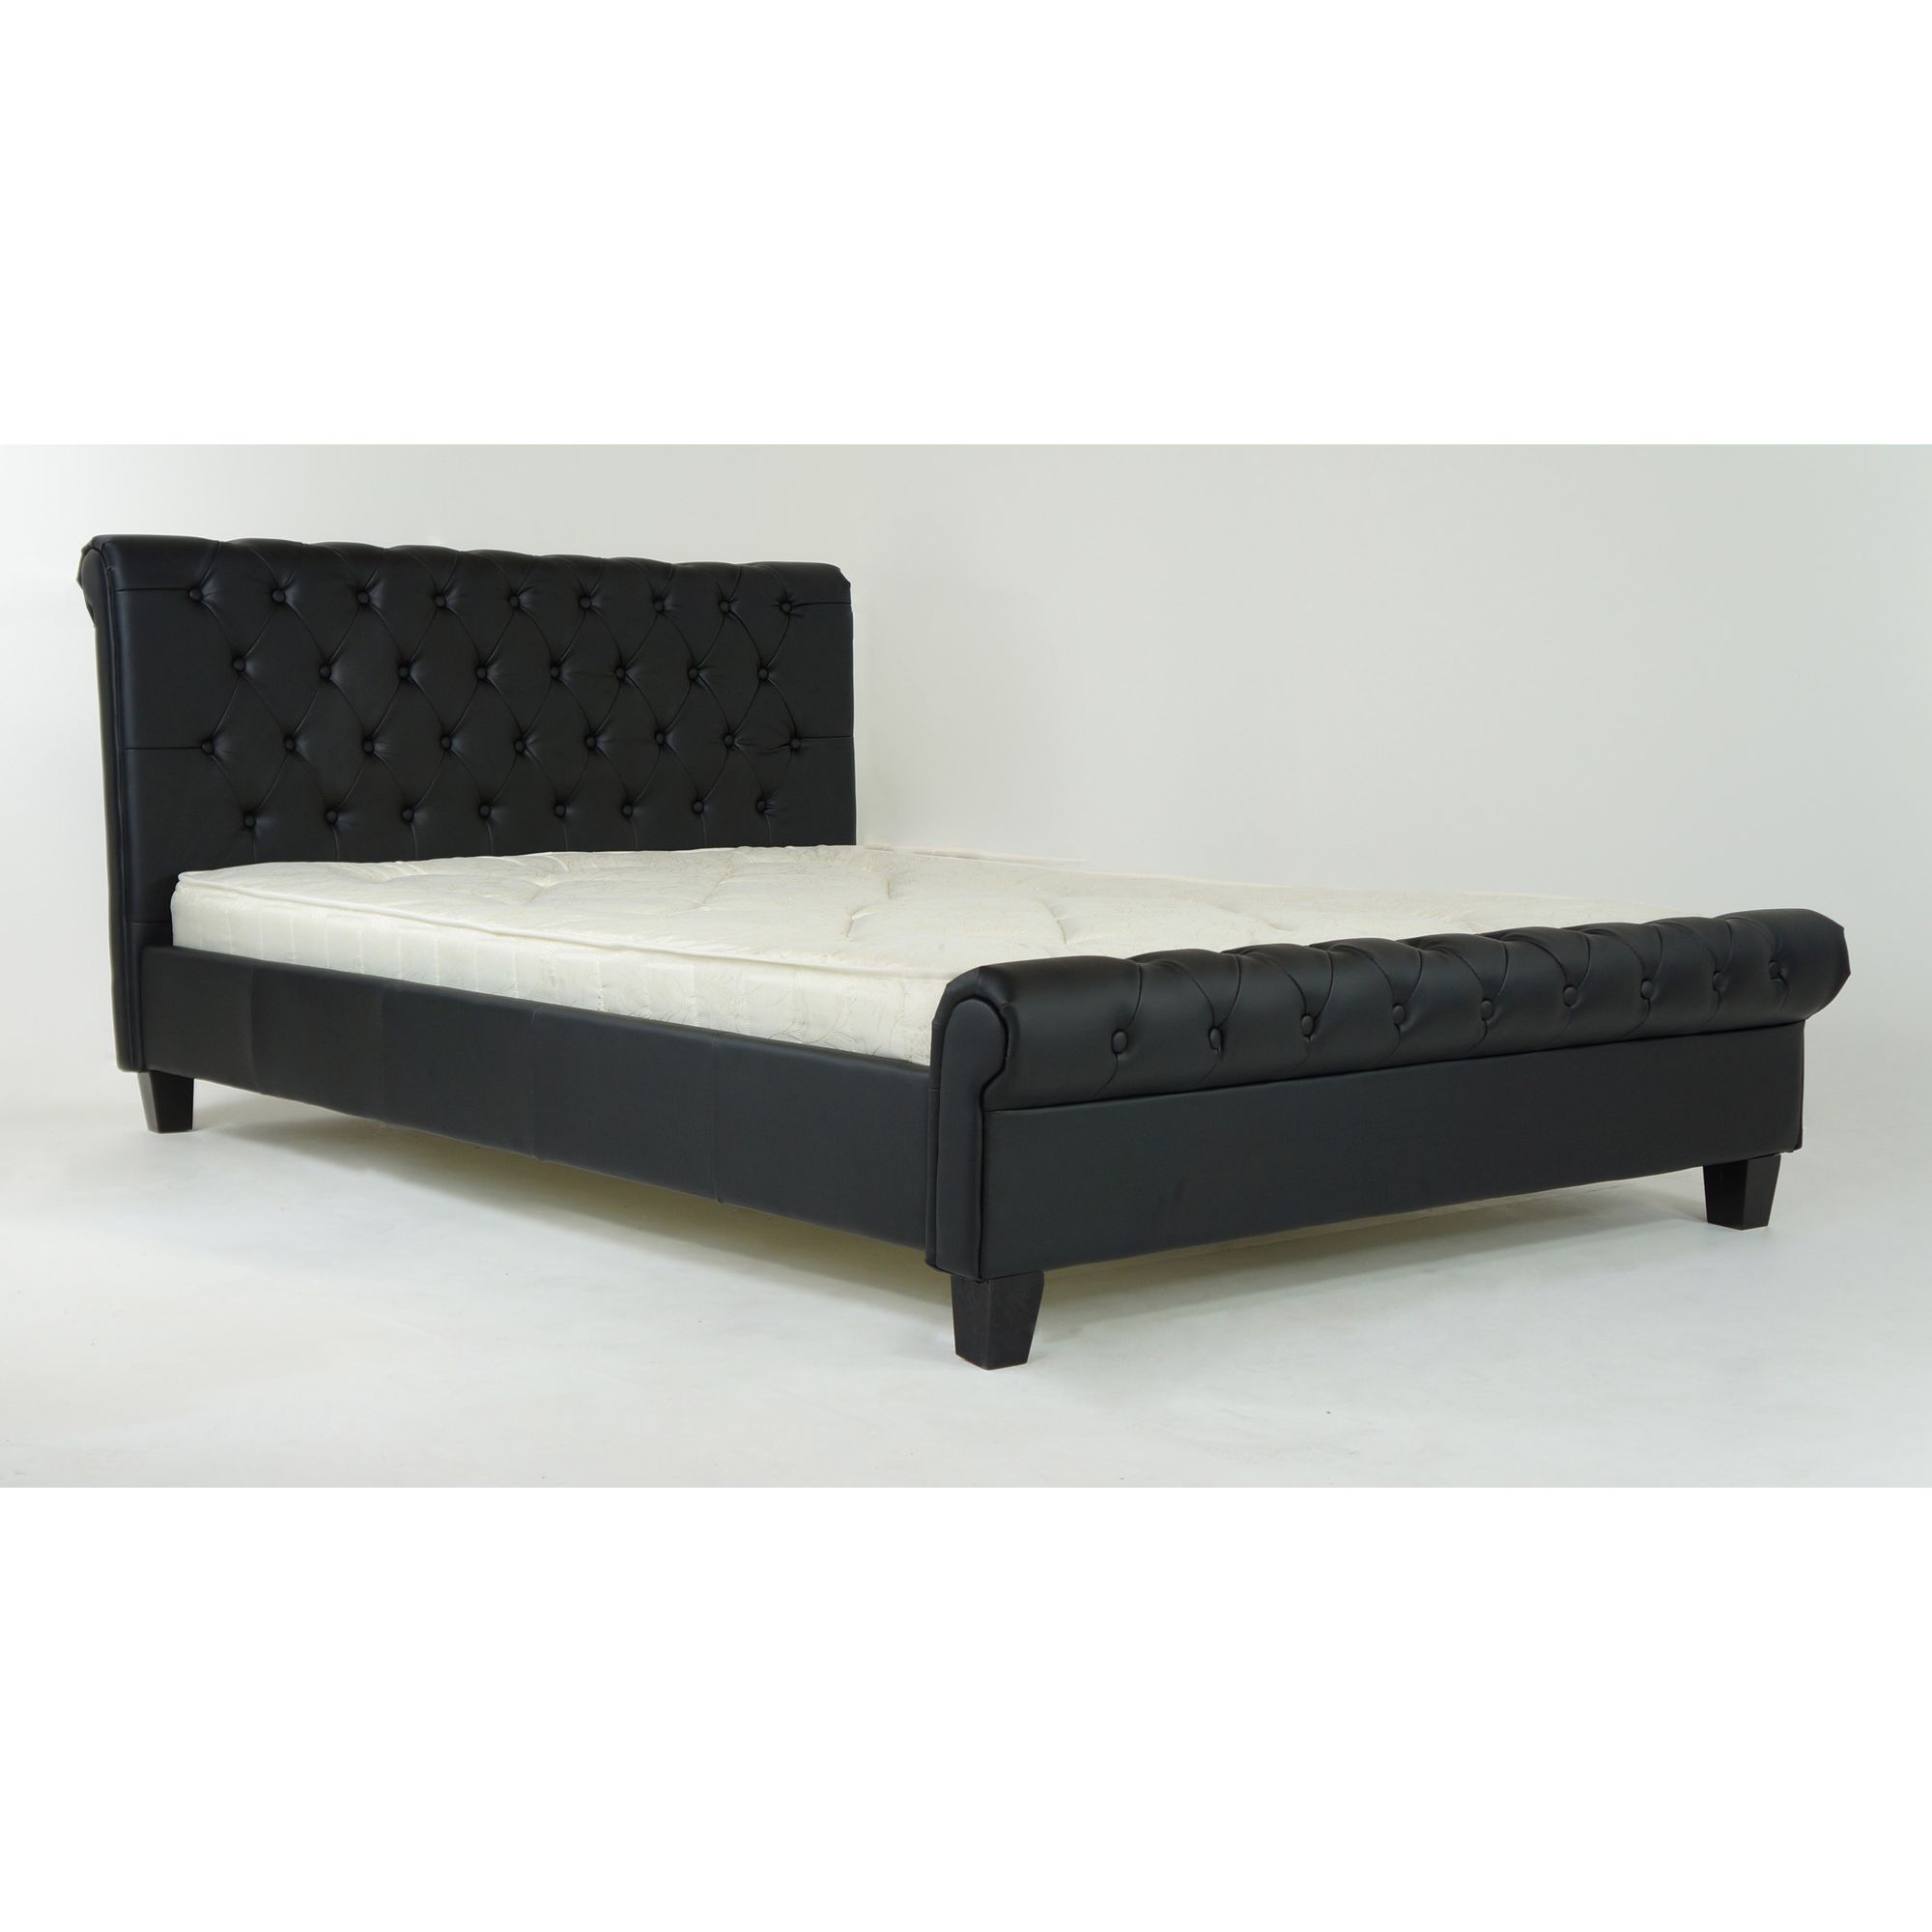 Alpha furniture Chesterfield Bed - Black - Double - No at Tesco Direct